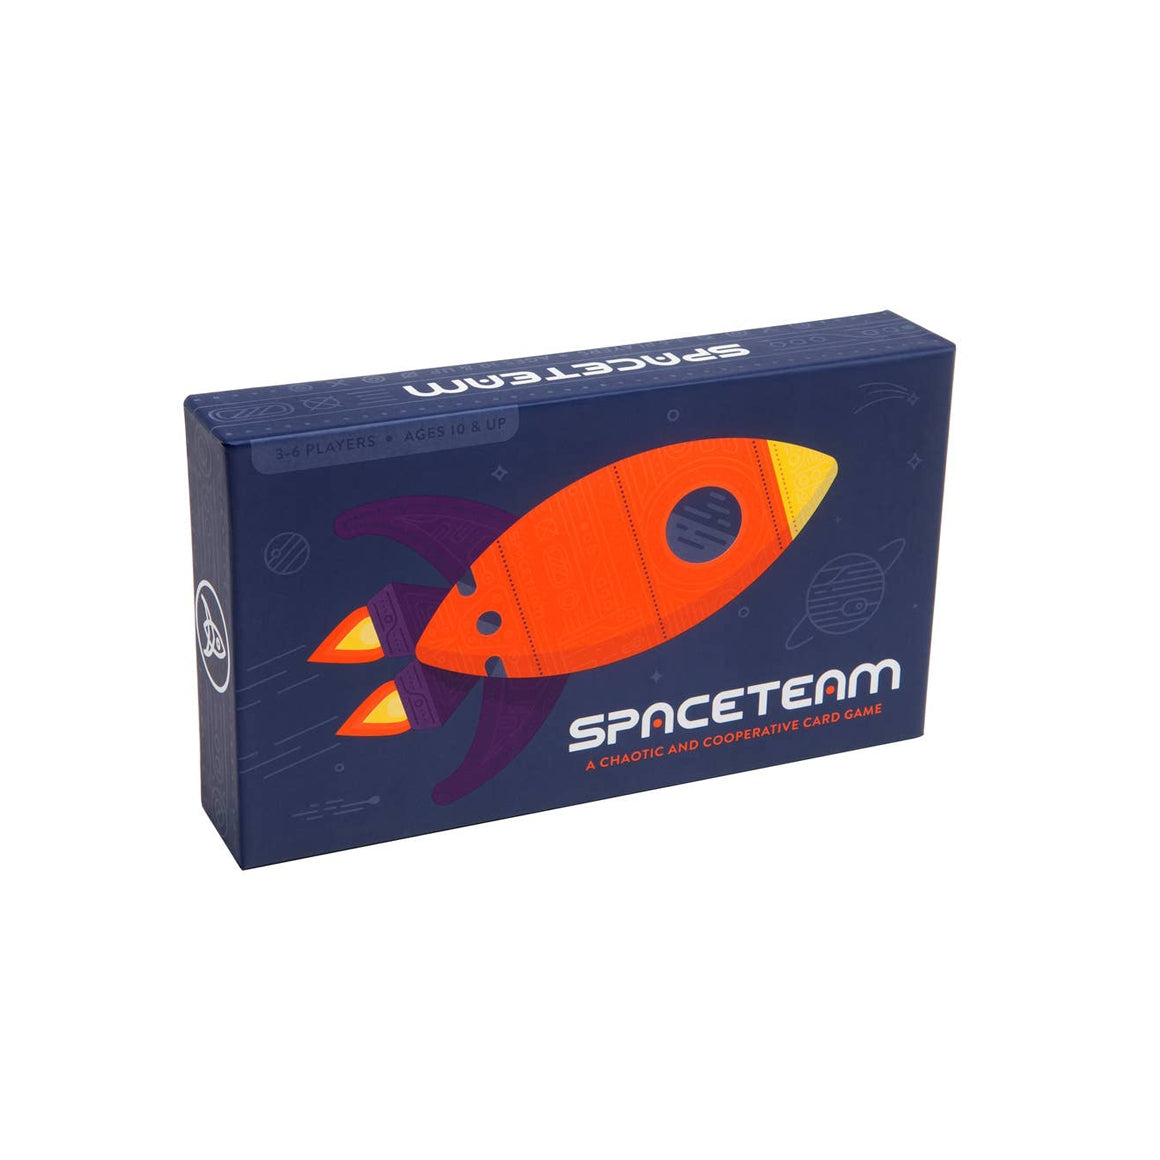 Spaceteam: A Chaotic & Cooperative Card Game